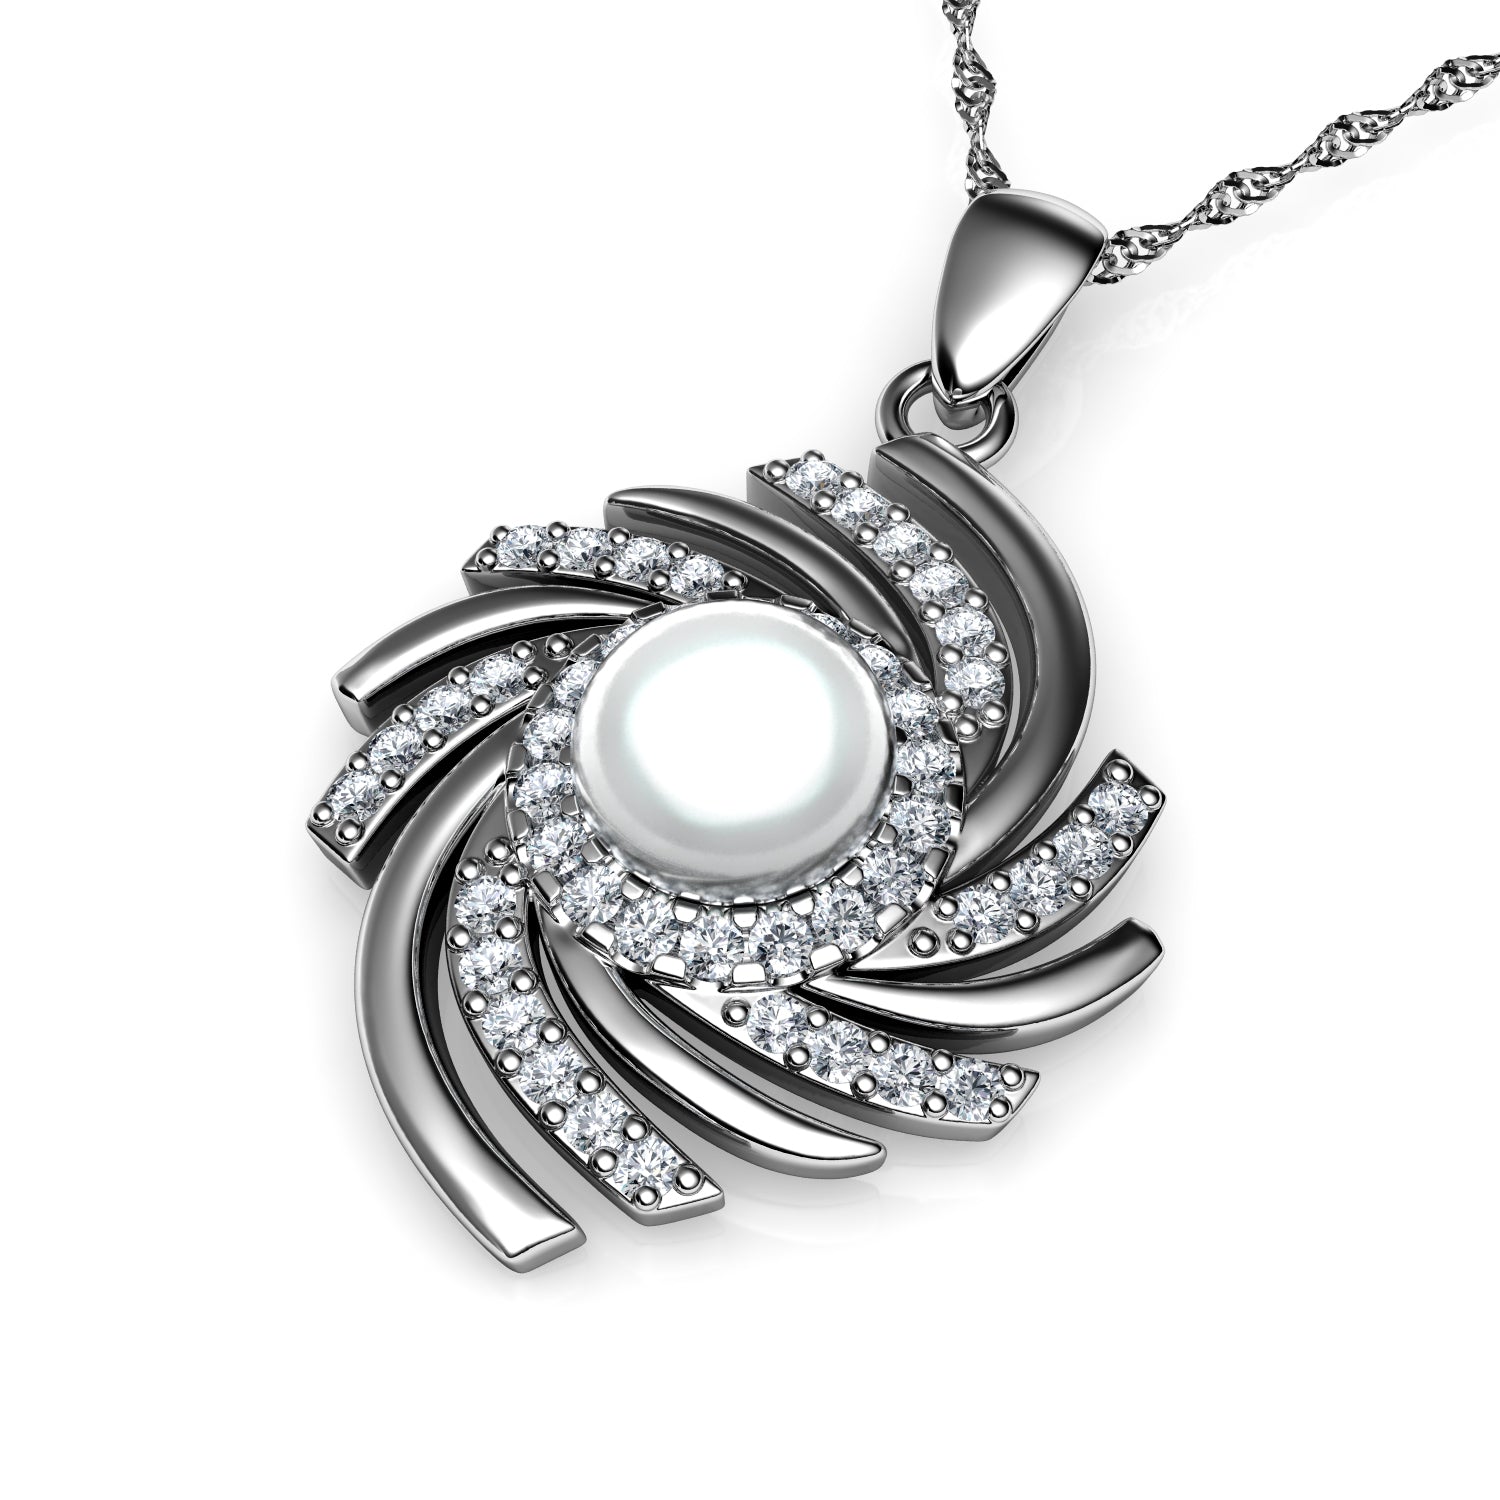 DEPHINI - Galaxy Necklace for Women - 925 Sterling Silver